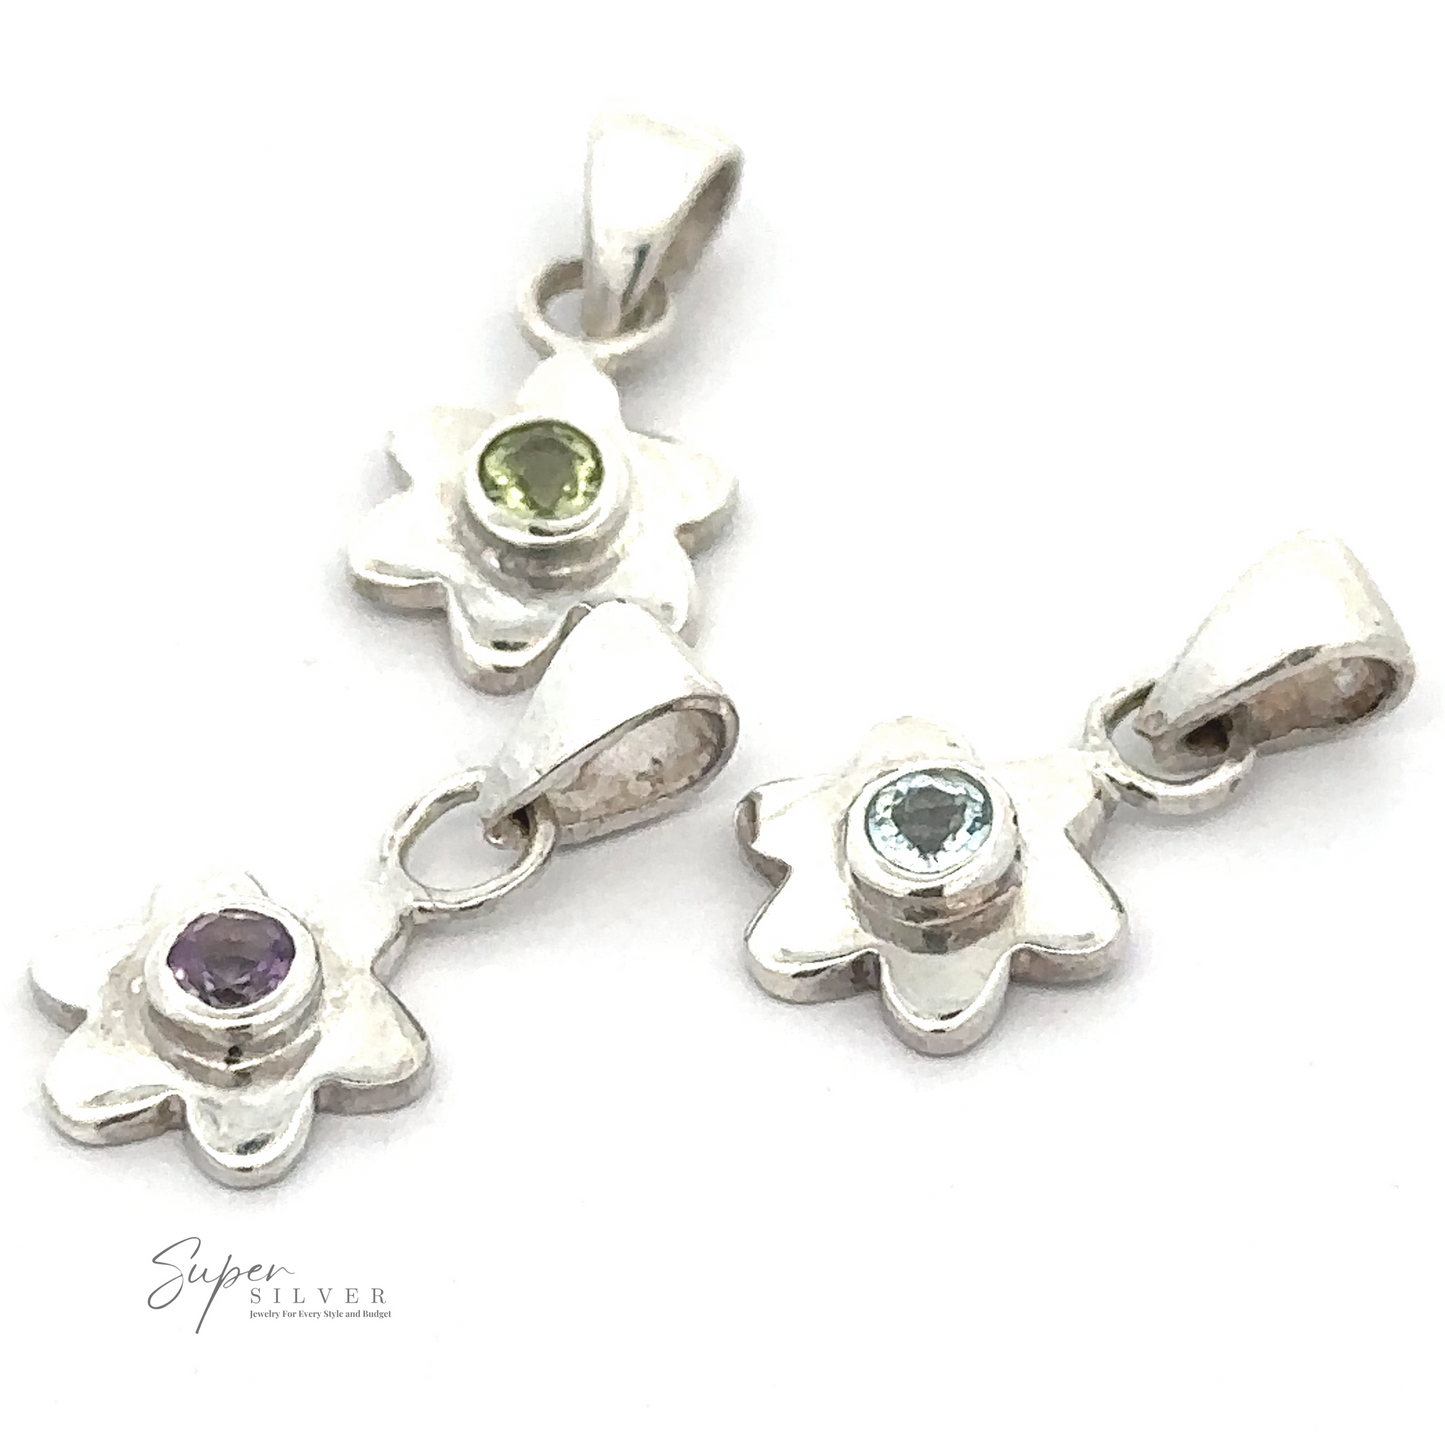 
                  
                    Three Tiny Gemstone Flower Pendants, each with a unique gemstone center, arranged on a white background. The gemstones are purple, light green, and light blue.
                  
                